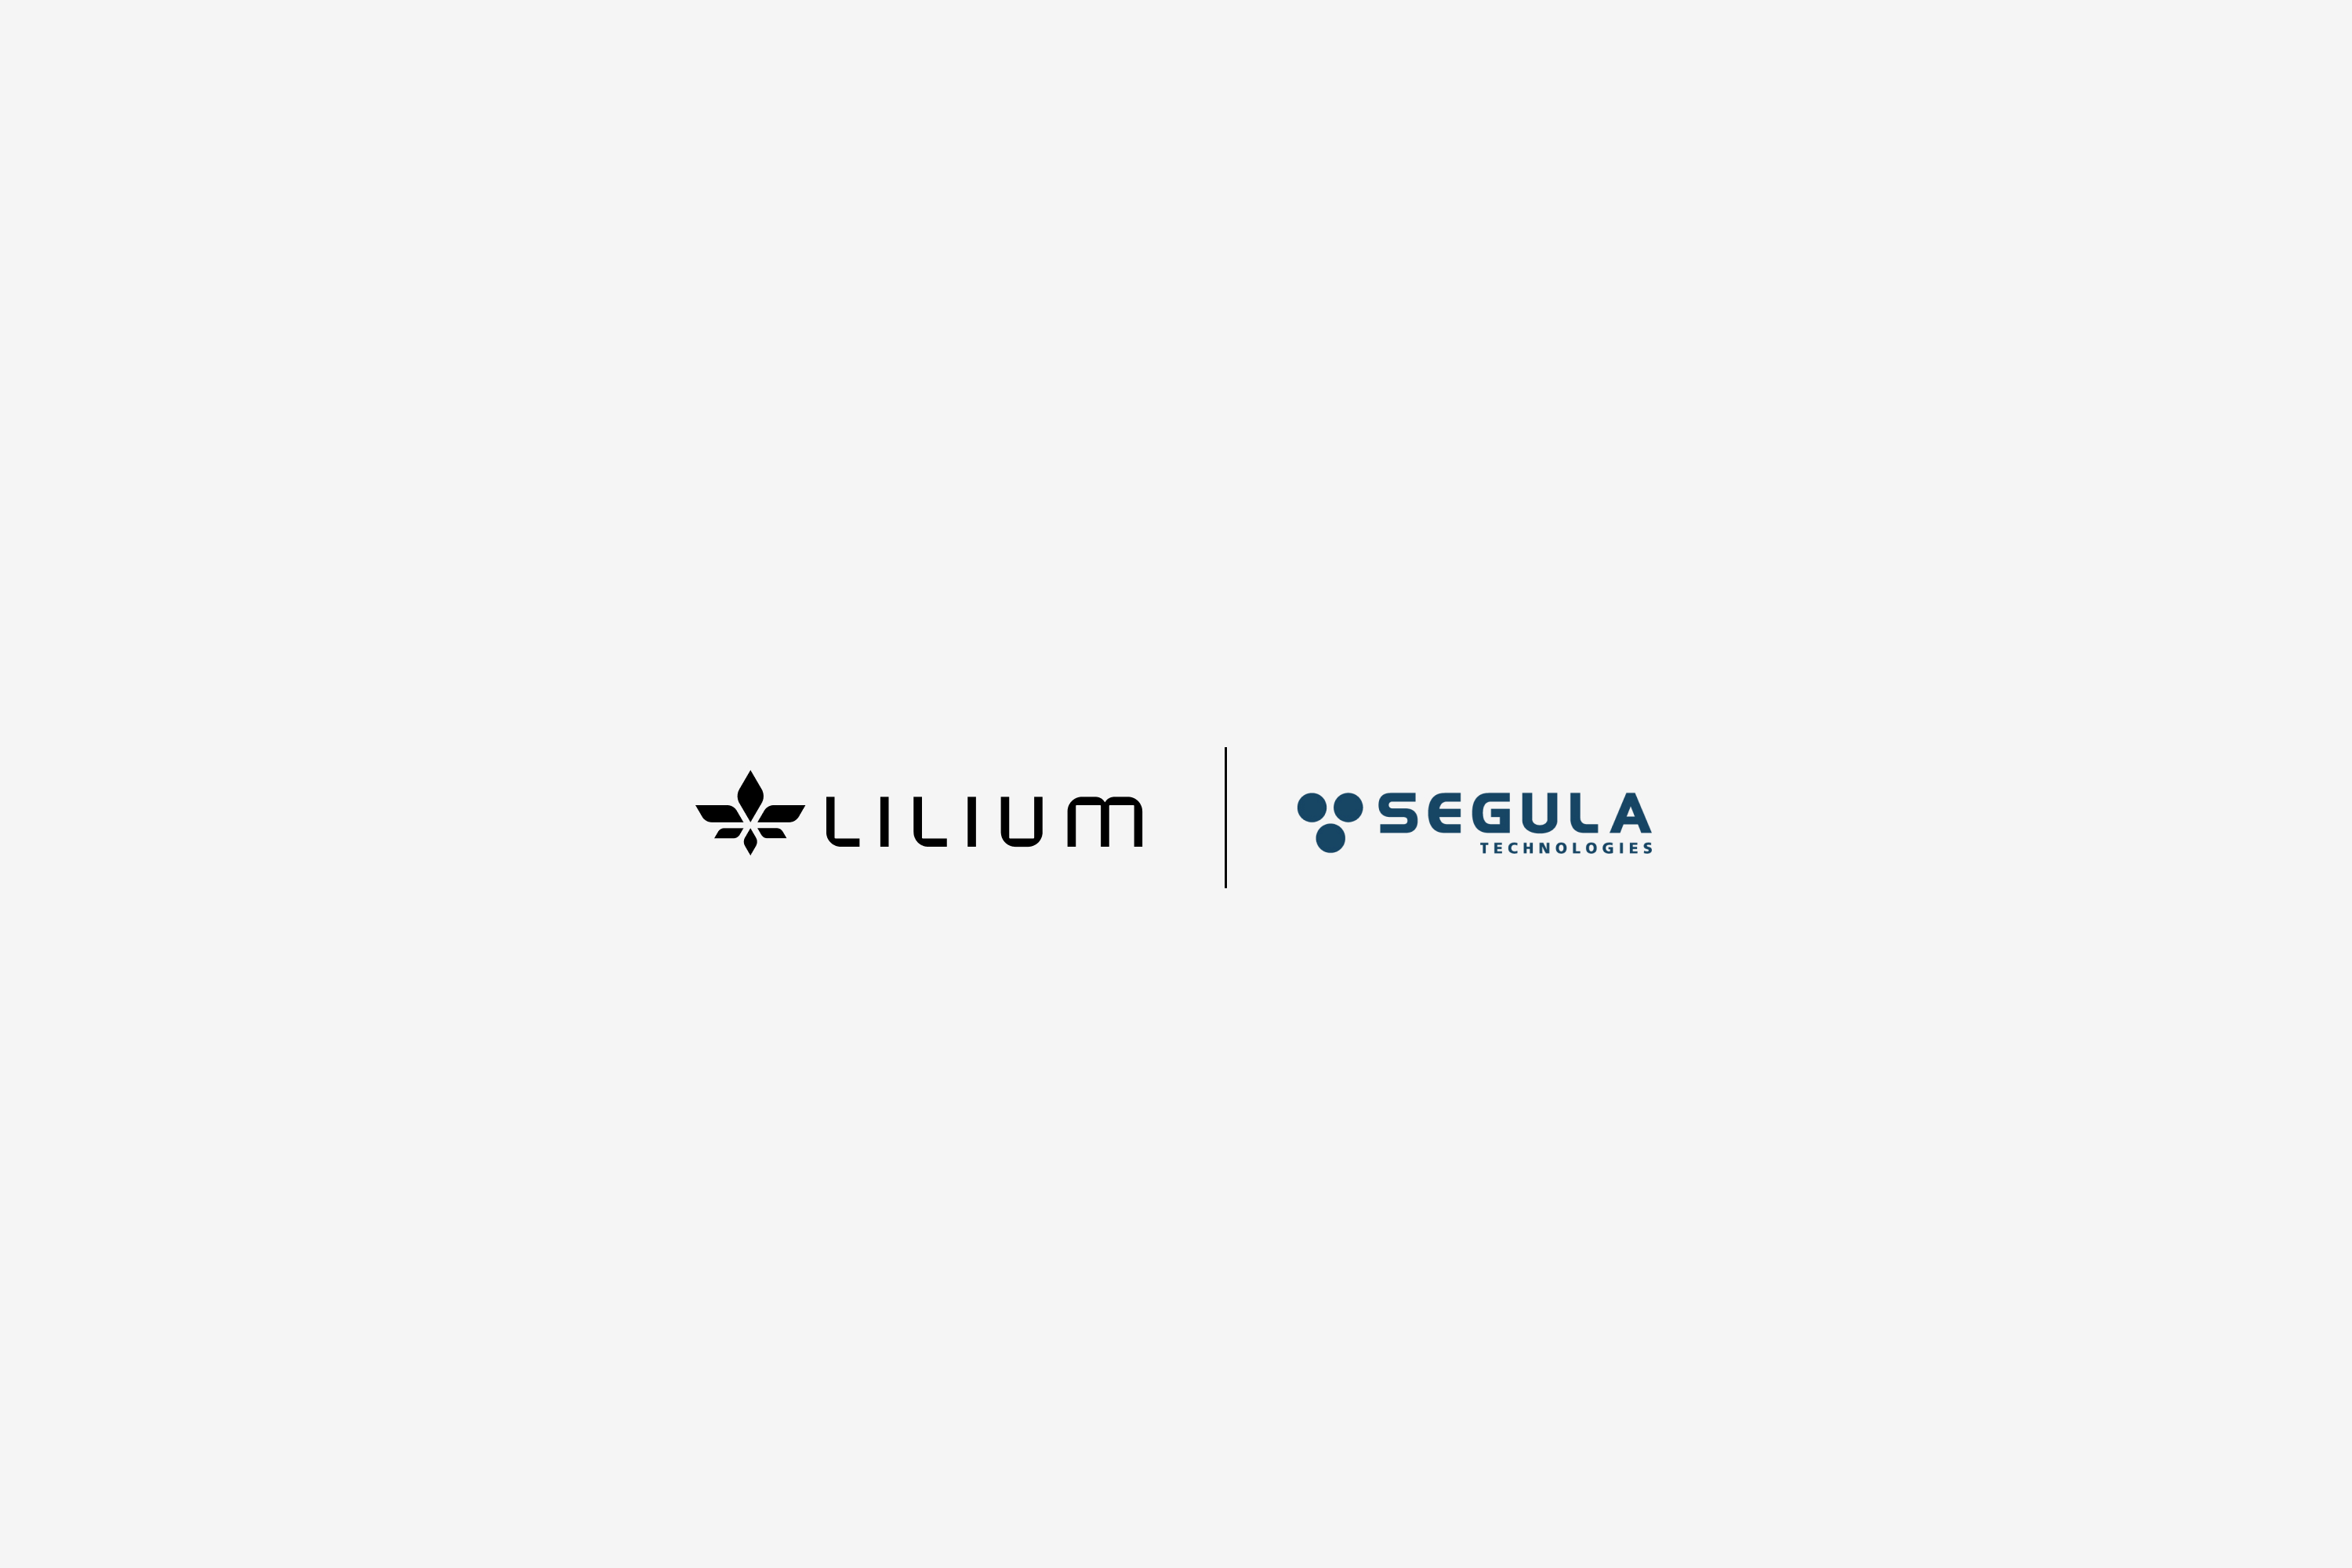 Lilium Begins Construction of Certification Test Facility for the Lilium Jet with SEGULA Technologies